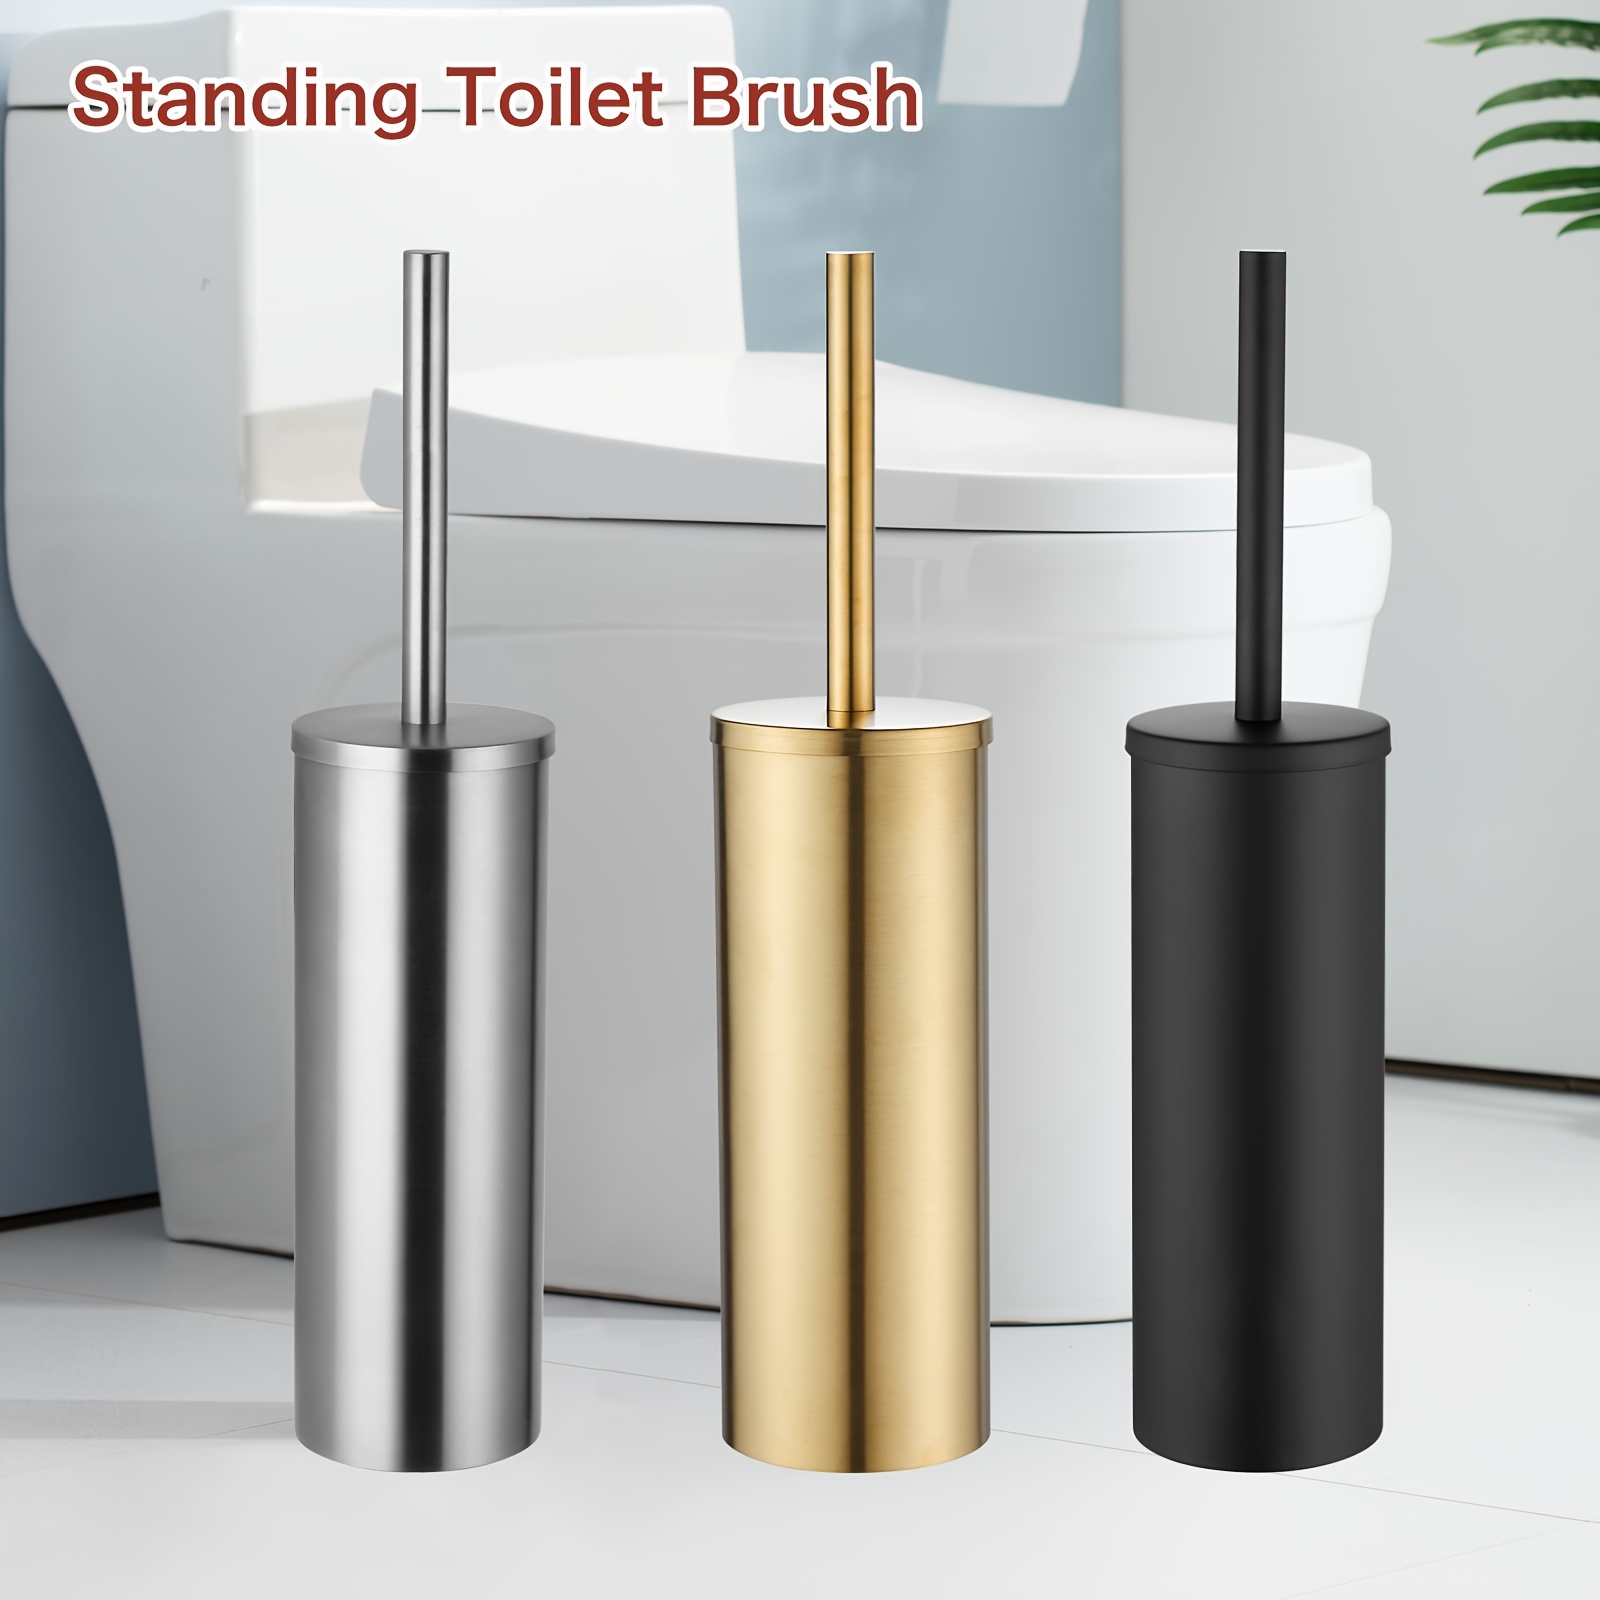 

1pc Standing Toilet Brush, Stainless Steel Handle Toilet Brush, Space-saving Compact Design, Splash-proof And Easy To Assemble, Deep Cleaning, Toilet Cleaning Tool, Toilet Supplies, Home Essential